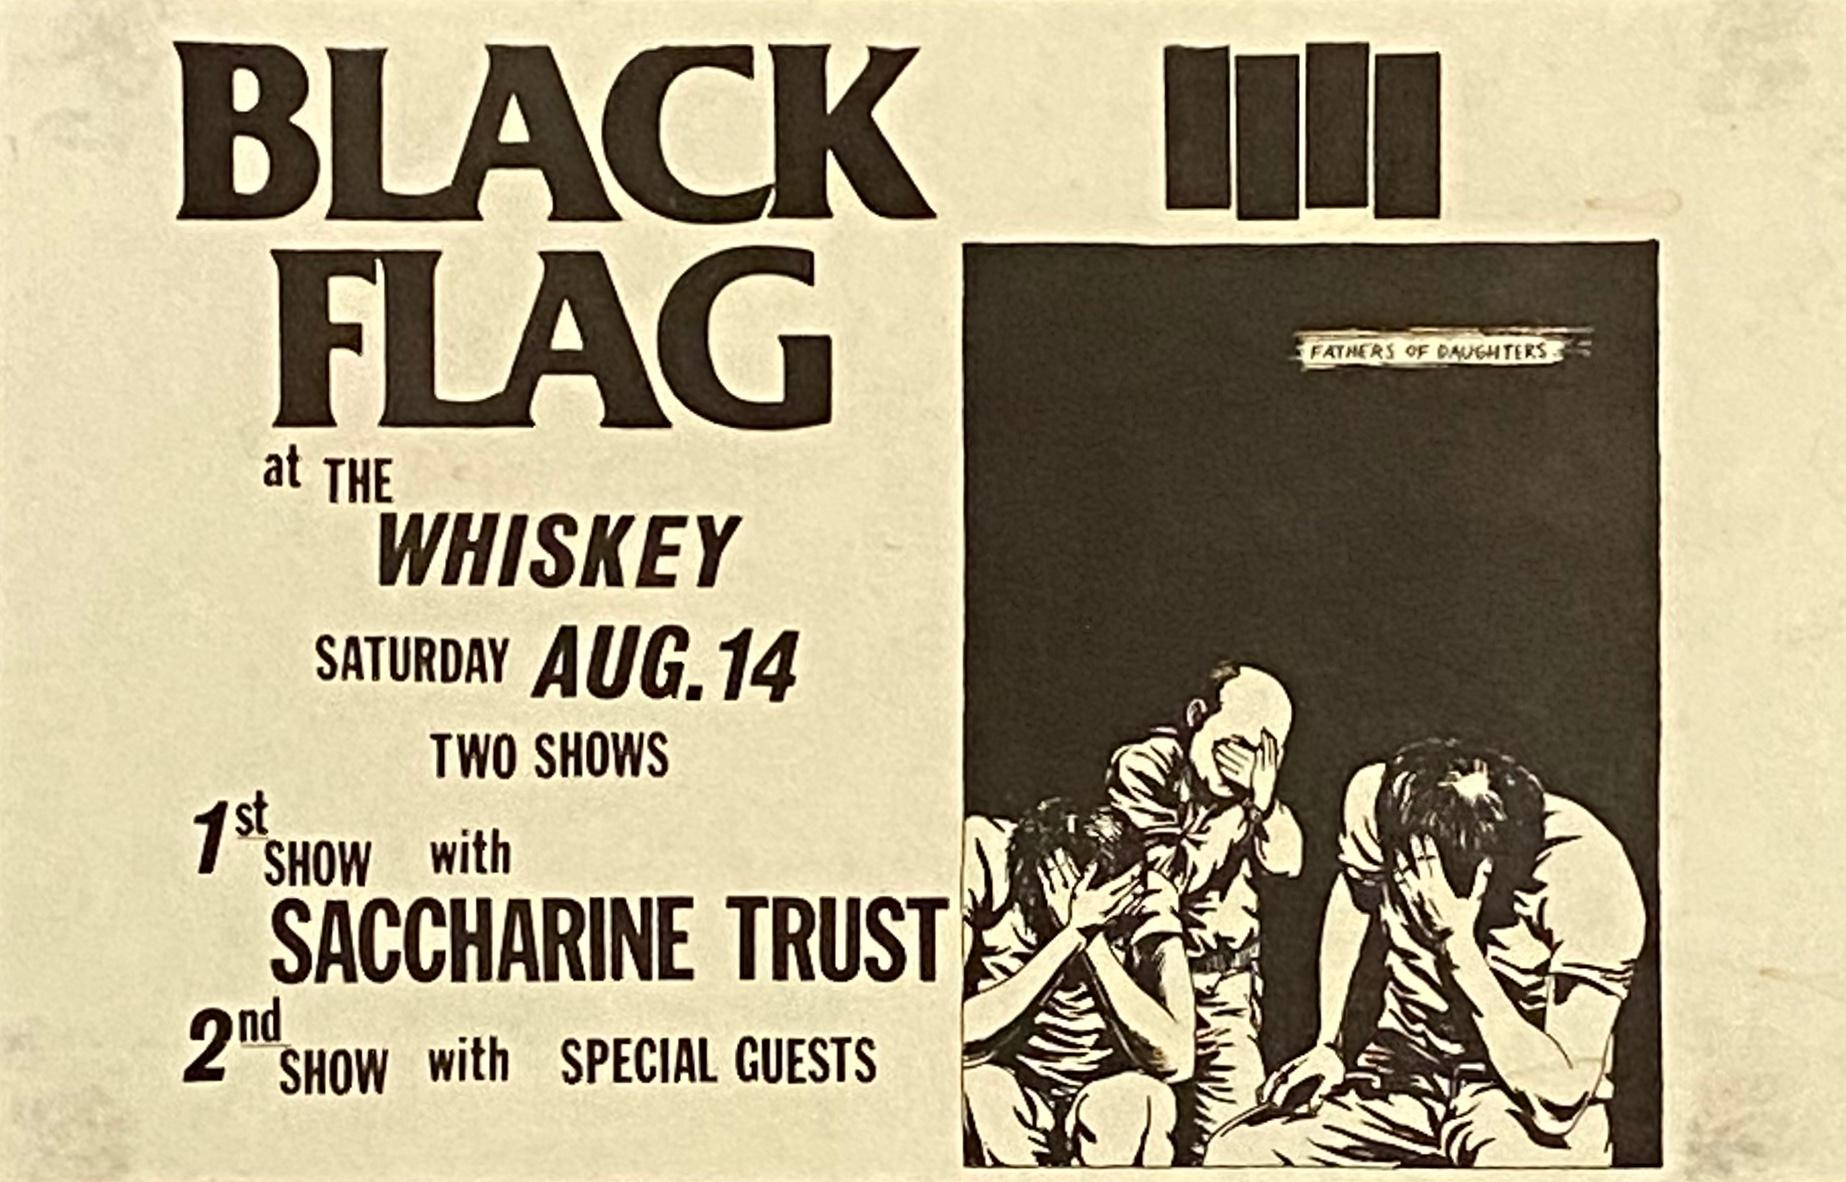 Raymond Pettibon Black Flag 1982: 
Black Flag at the Whiskey, August 14th, 1982.  Flyer announcing gig by Black Flag, Saccharine Trust featuring original off-set artwork by Raymond Pettibon.

Offset printed; 5.5 x 8.5 inches.
Minor wear commensurate